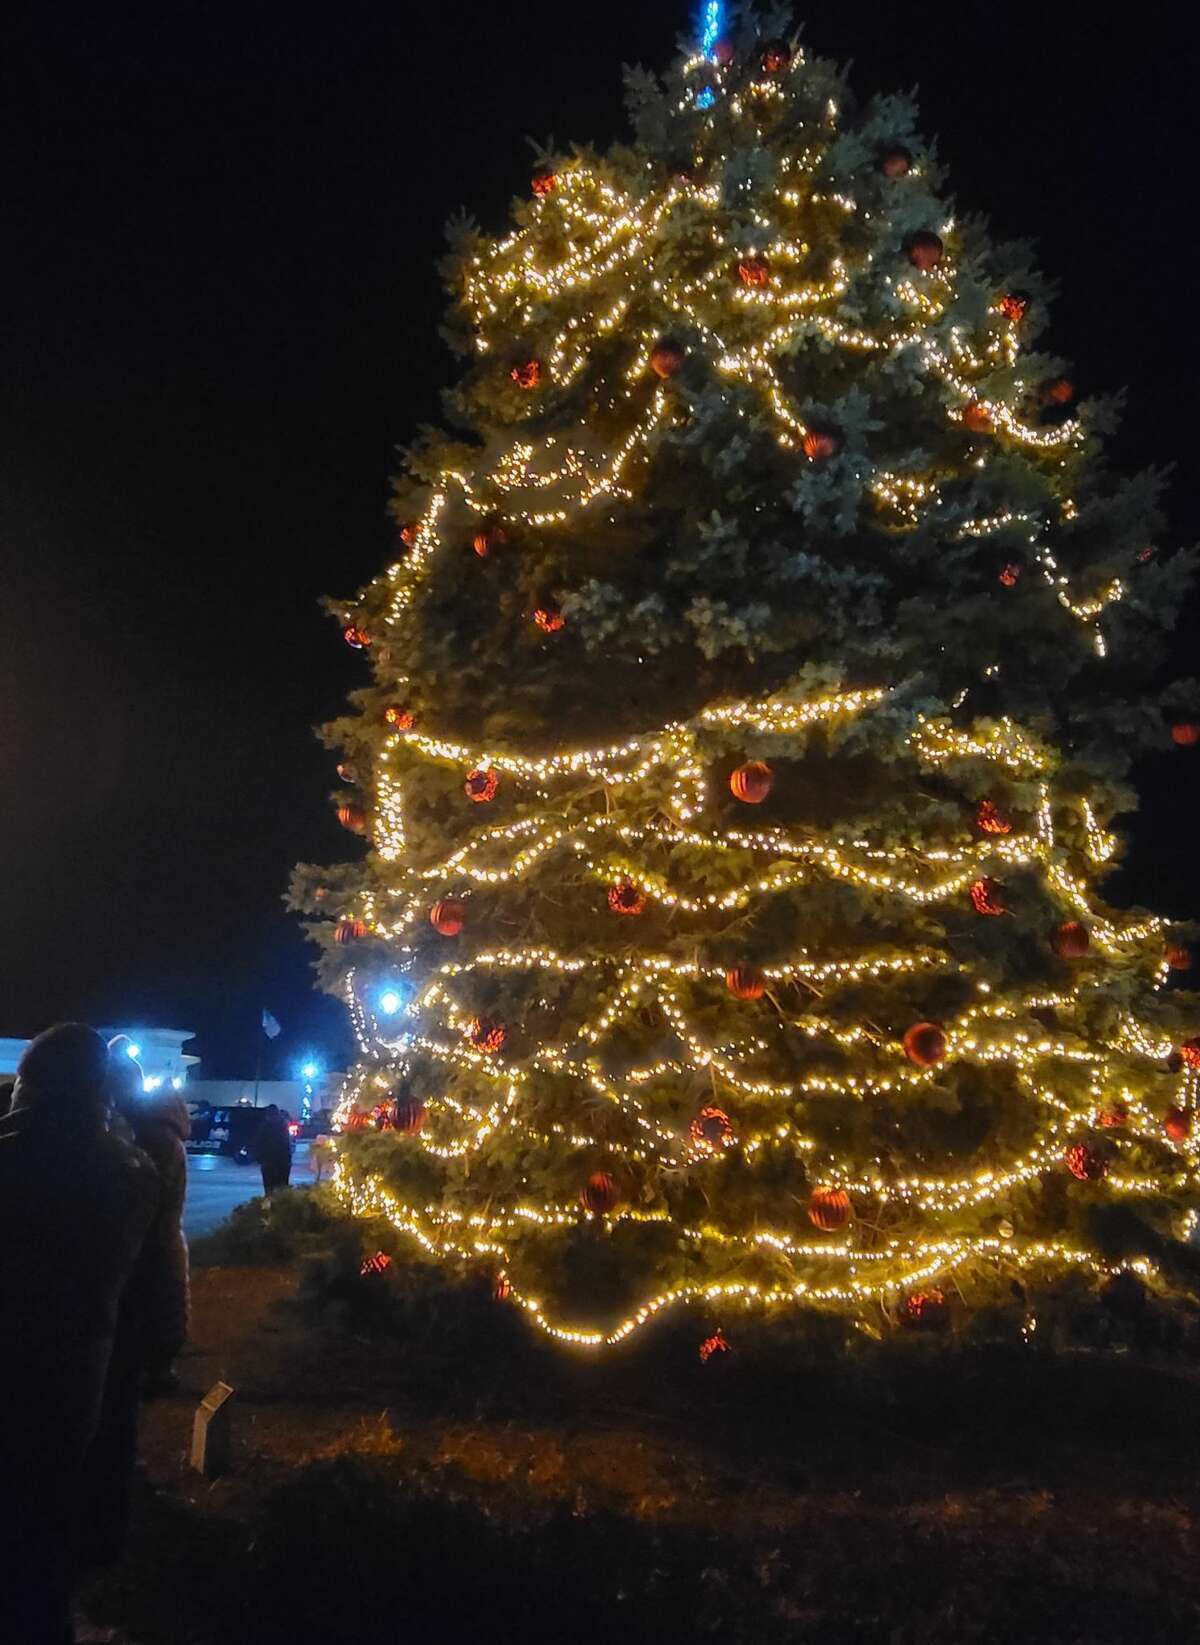 Frankfort's Christmas tree has new lights and ornaments thanks to a partnership between volunteers and the city. 